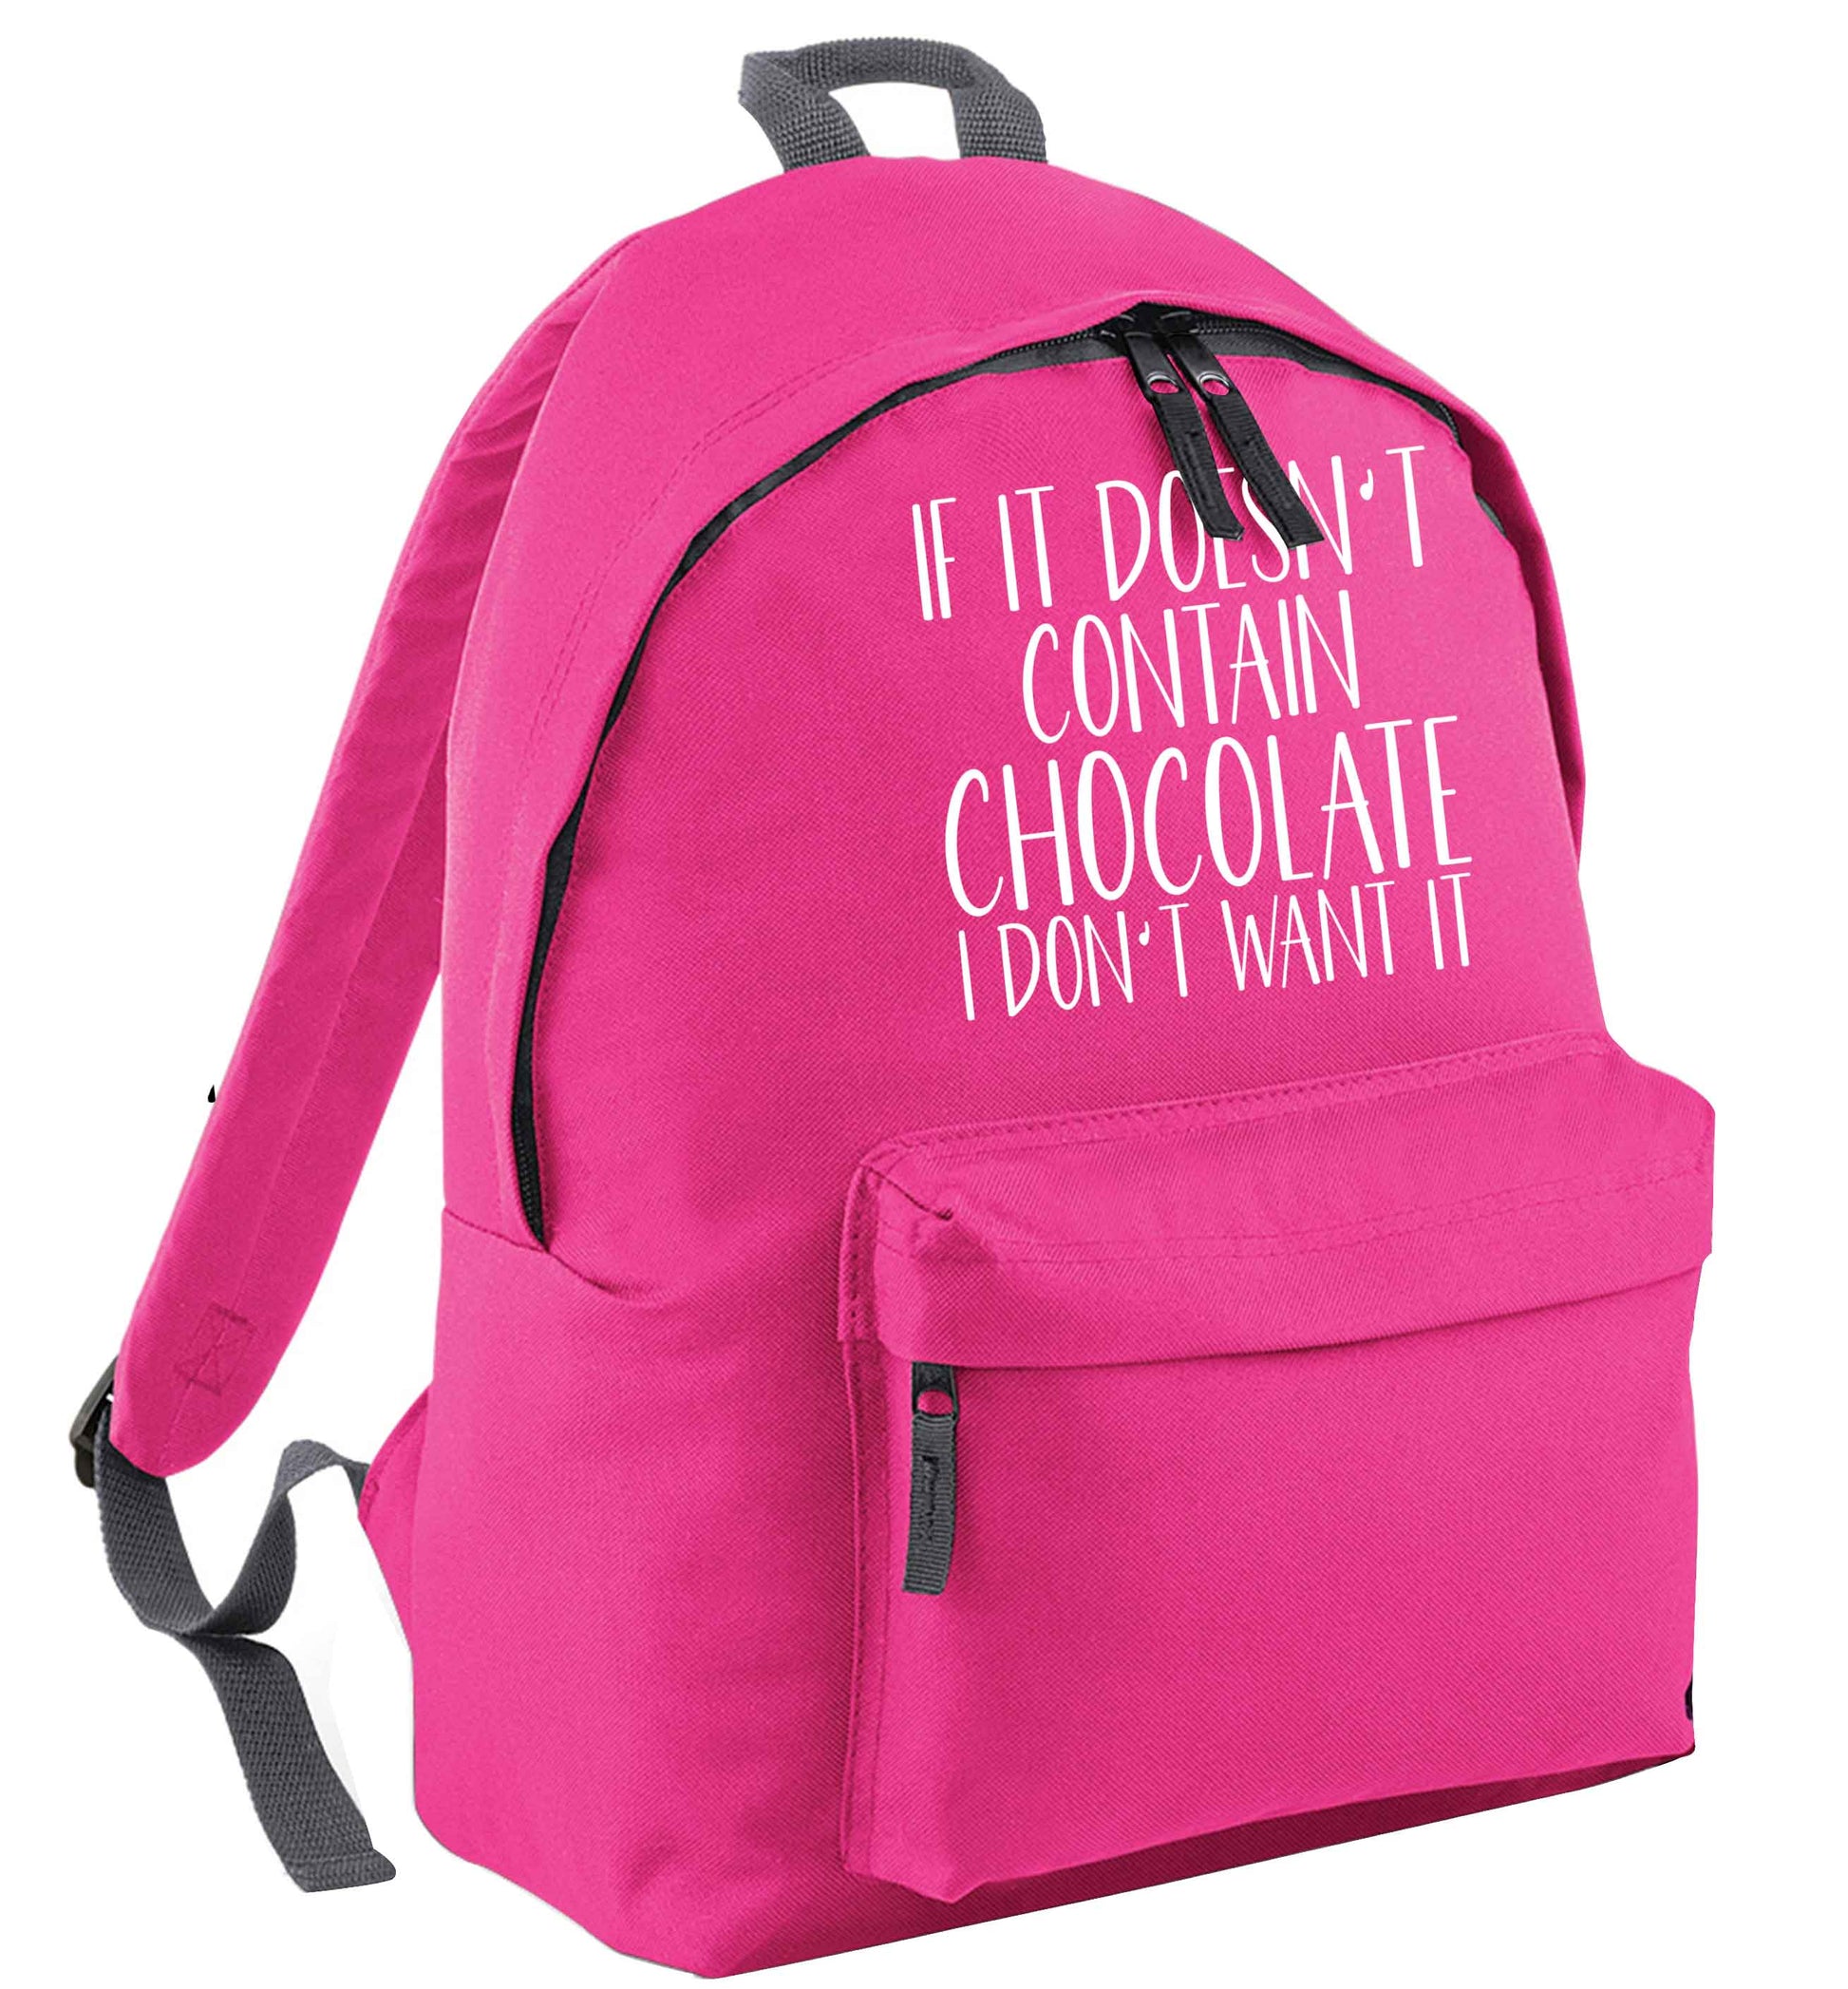 If it doesn't contain chocolate I don't want it pink adults backpack